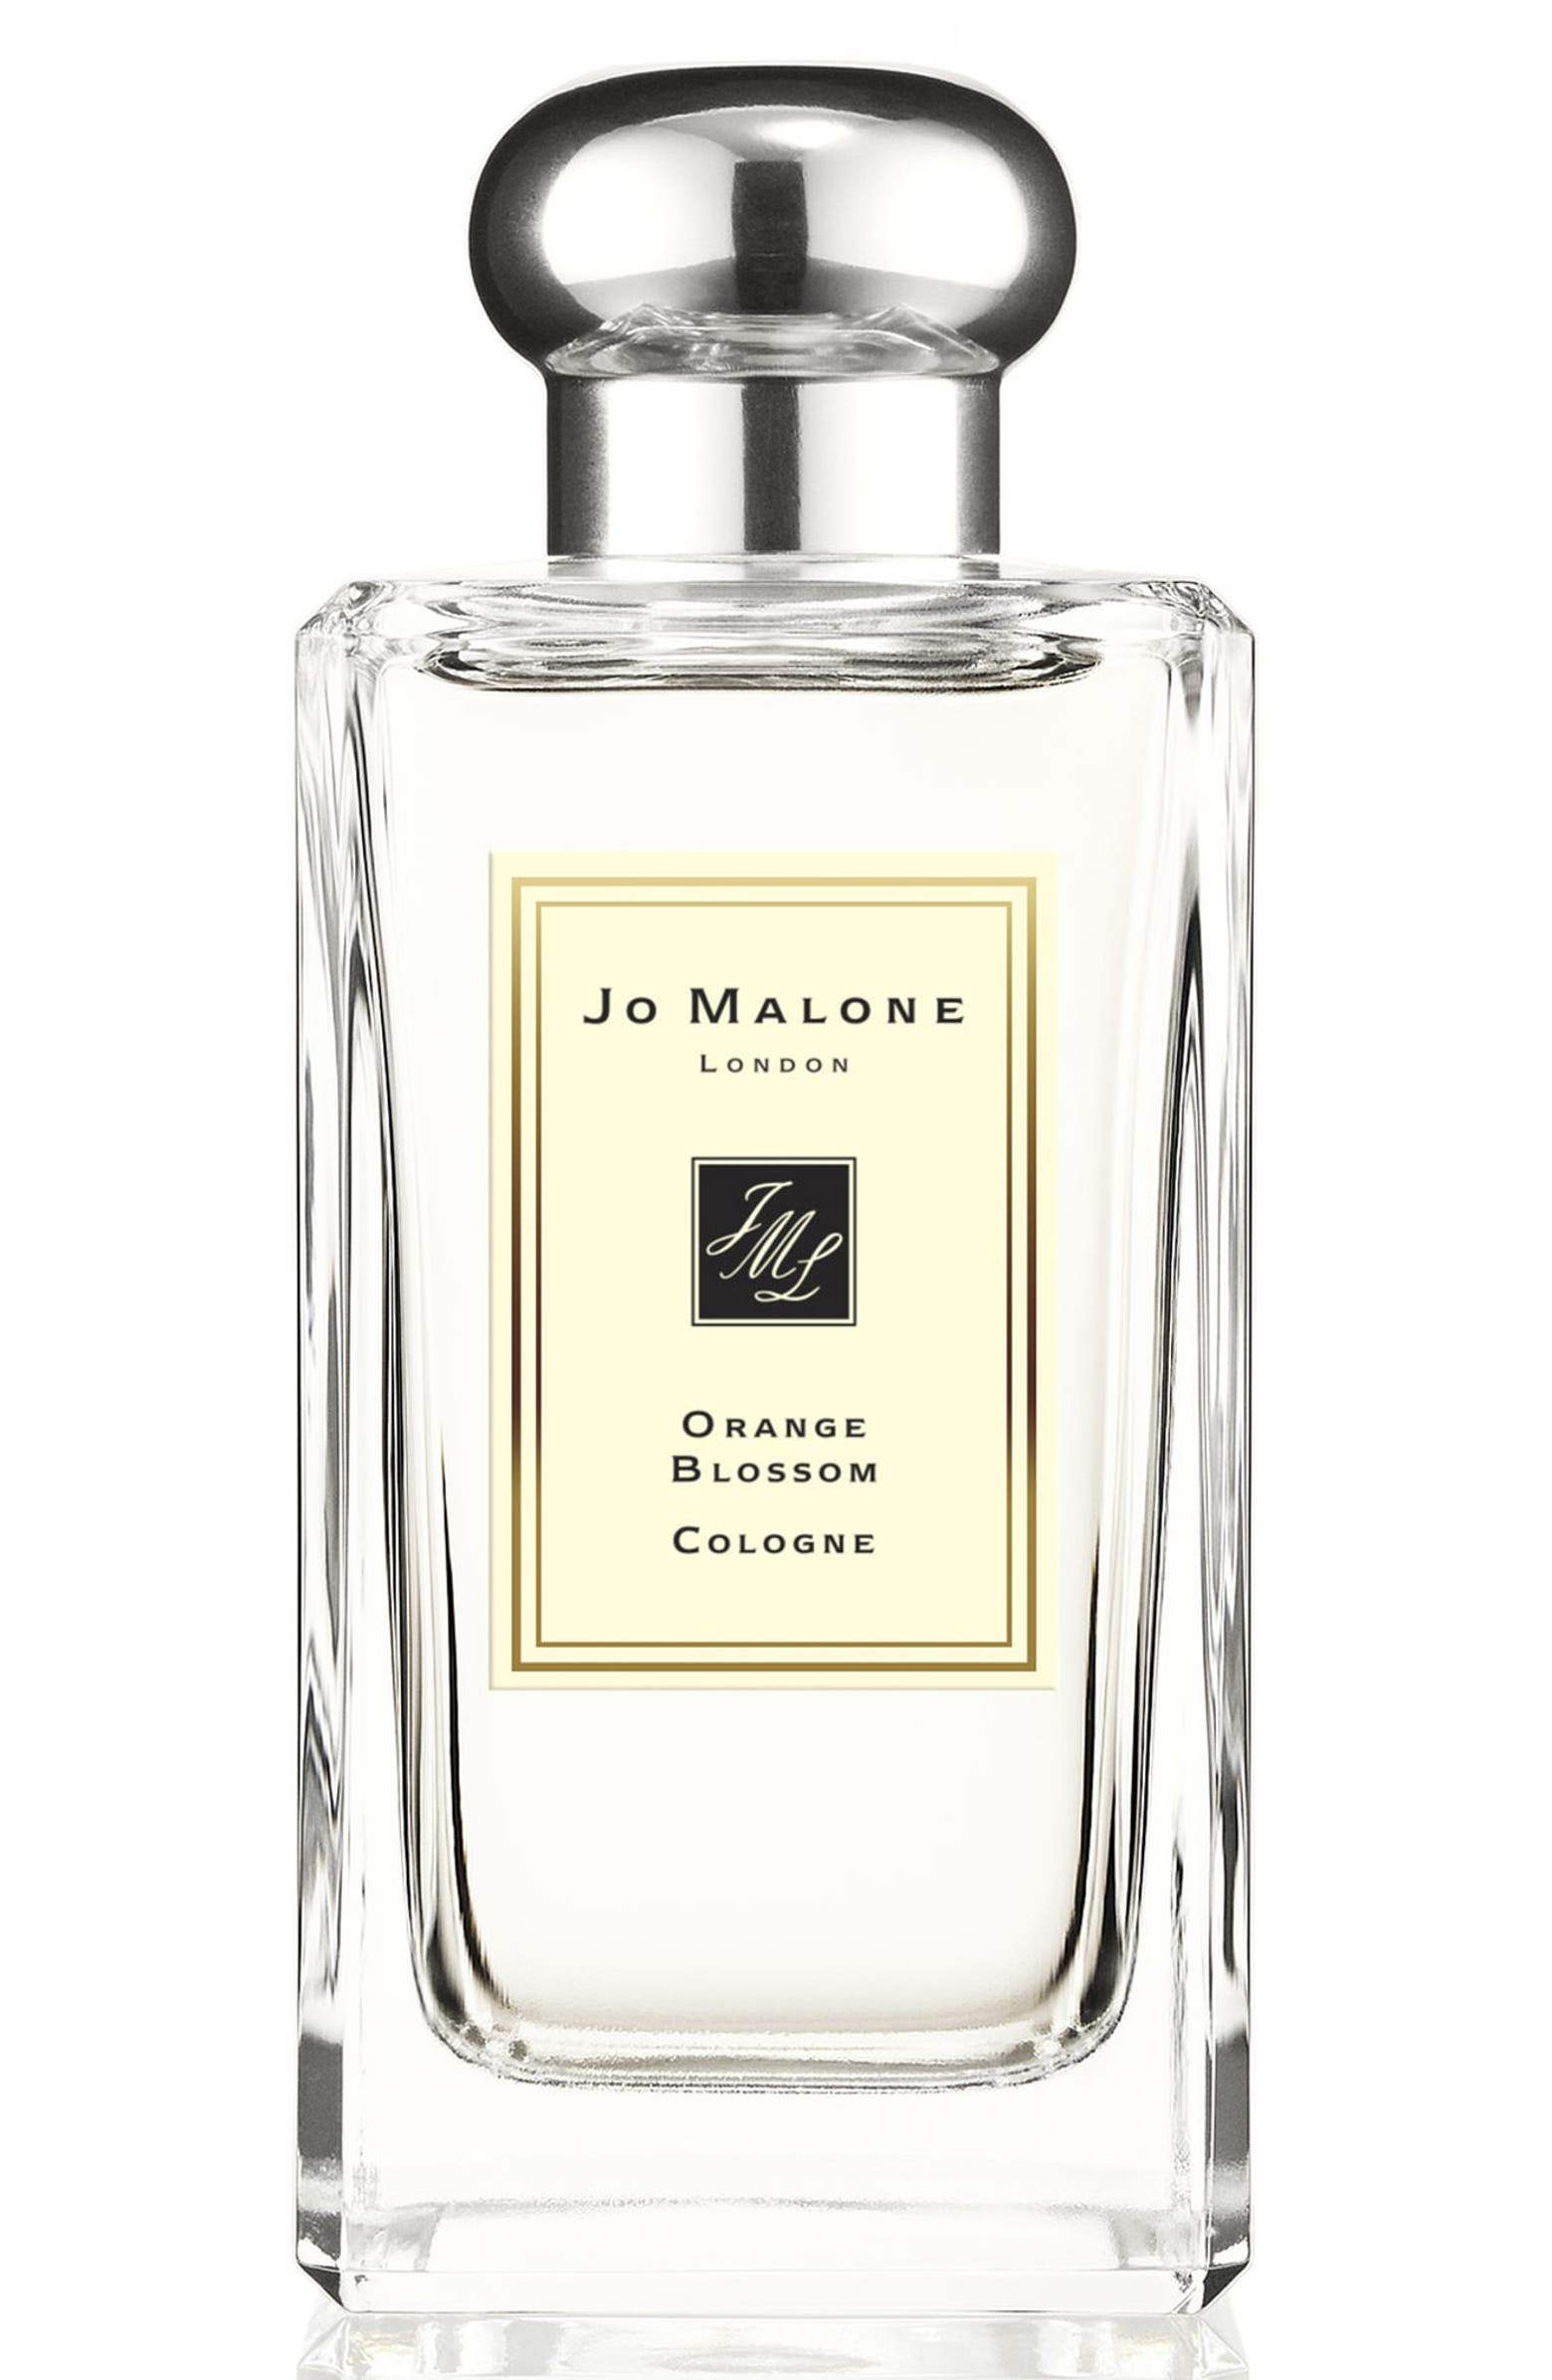 Bohemian Orange Blossom by Atelier Cologne » Reviews & Perfume Facts